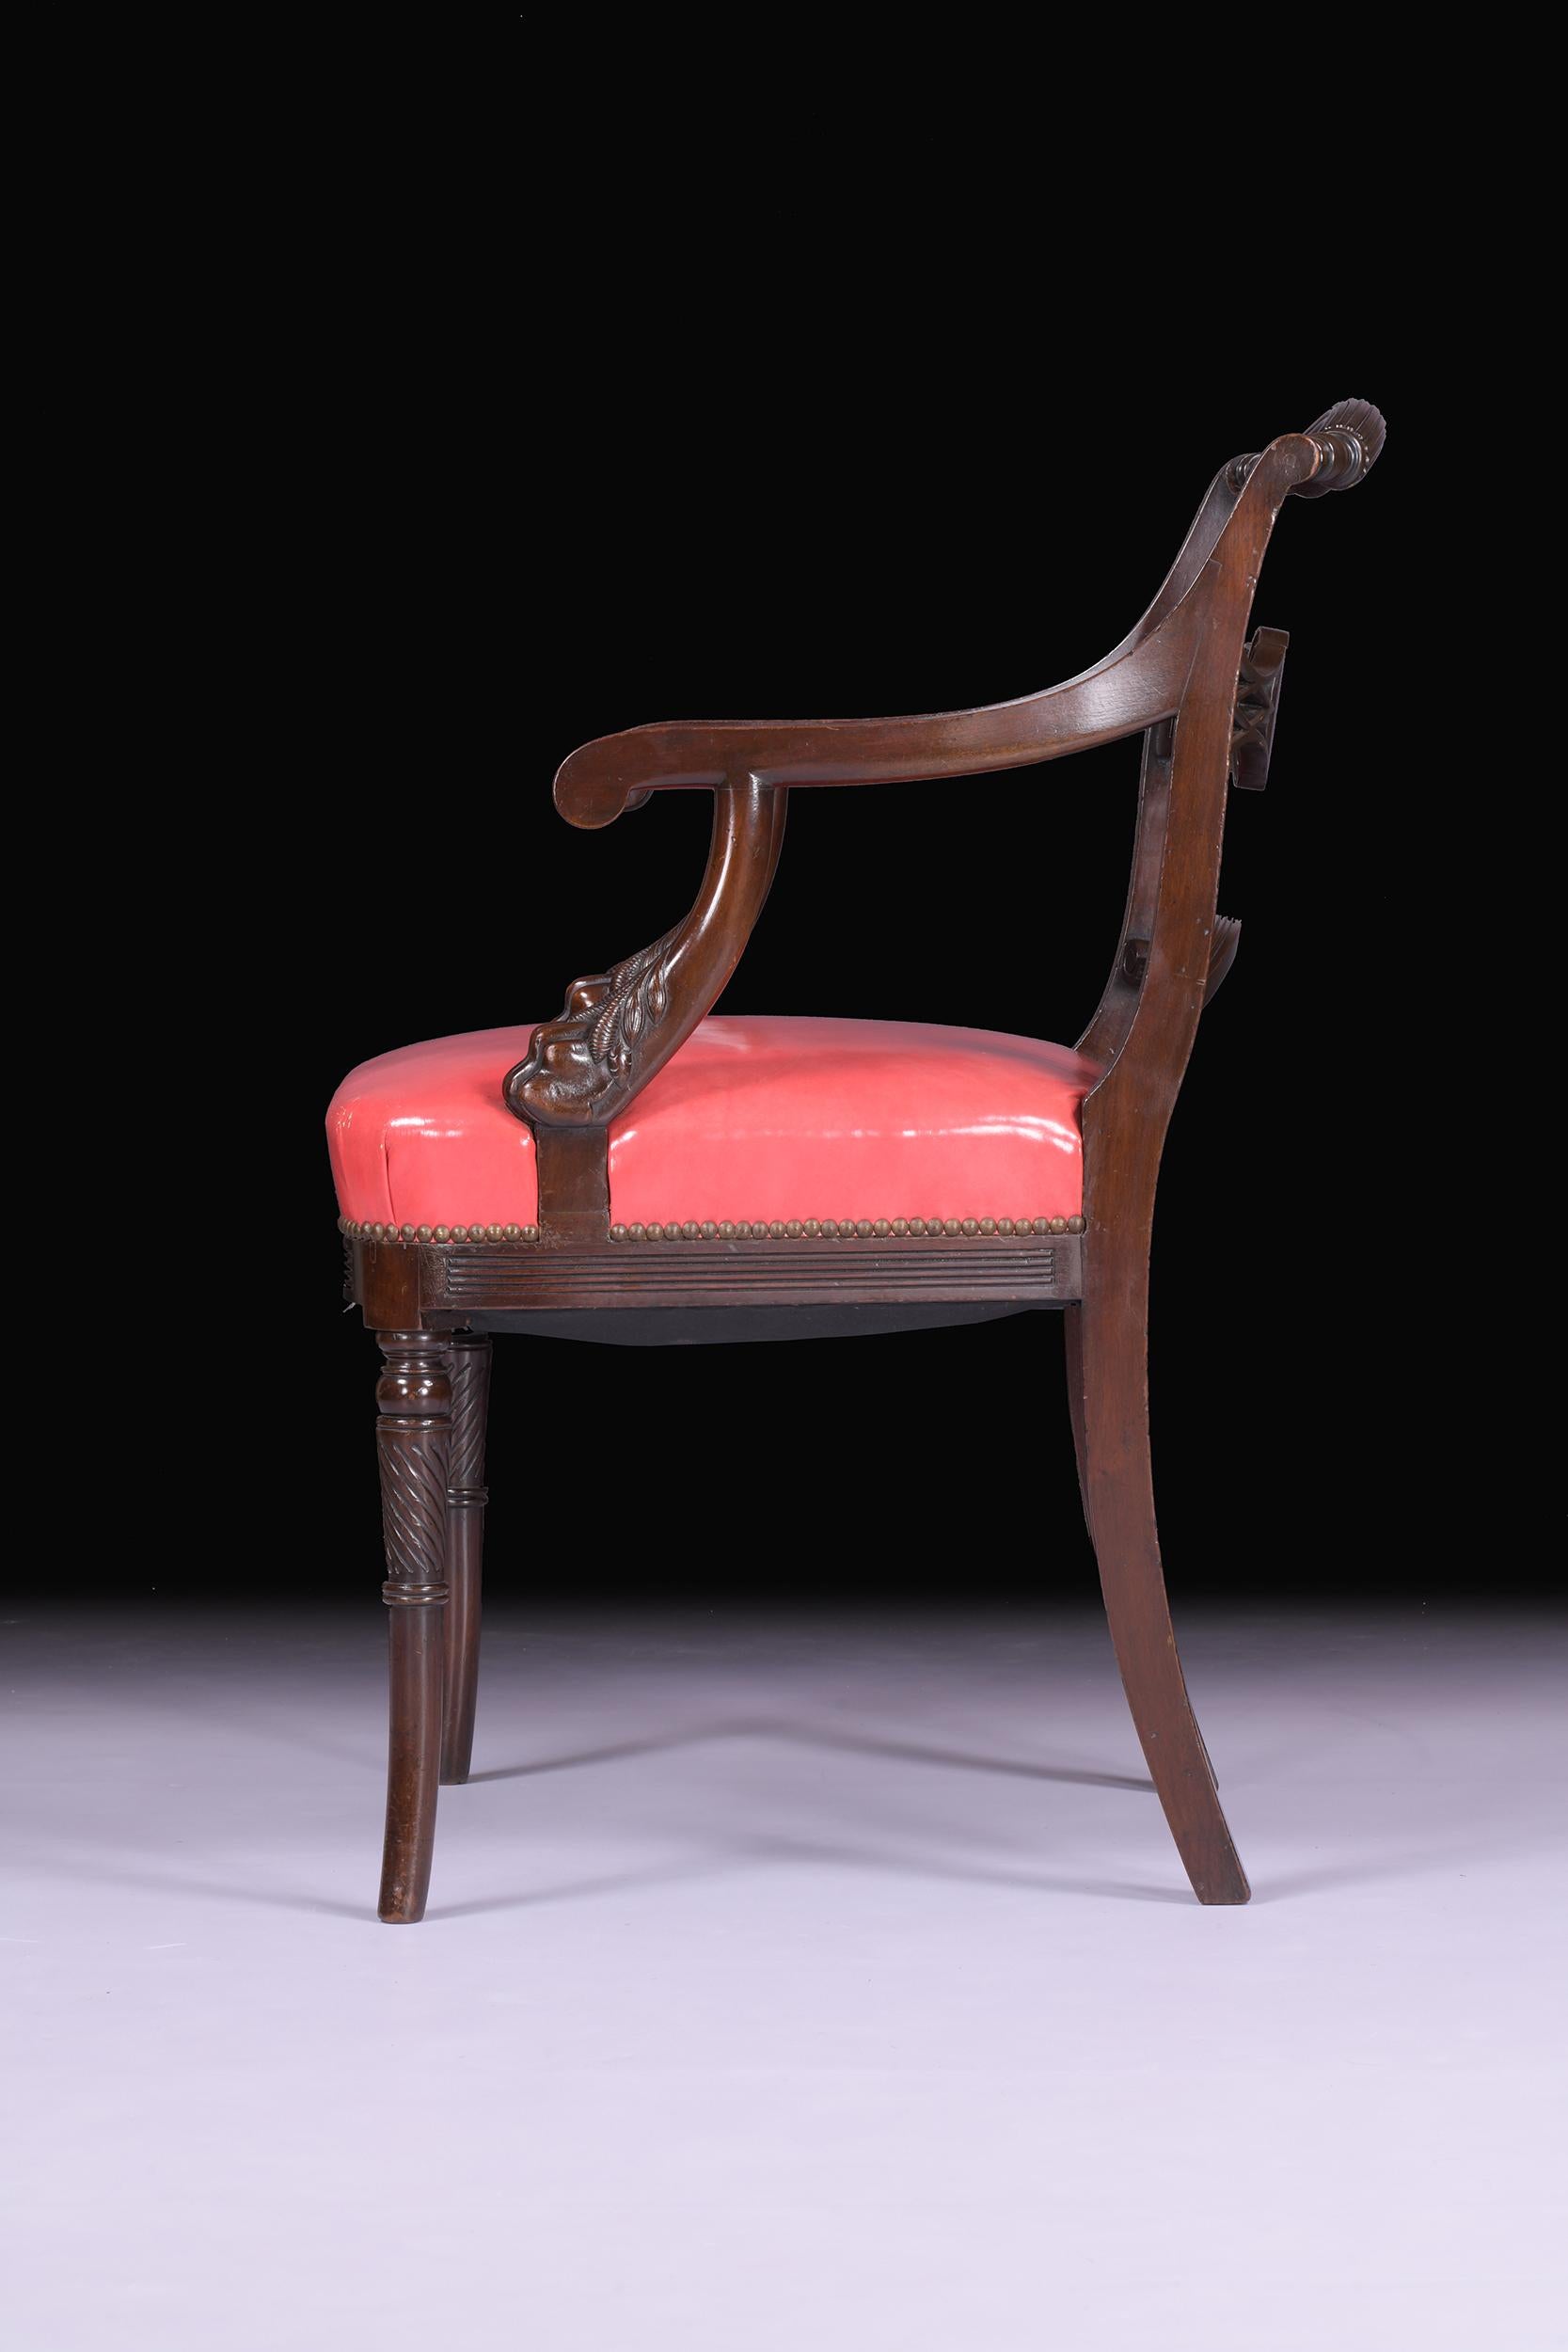 Pair of Early 19th Century Irish Regency Armchairs by Mack Williams & Gibton For Sale 2